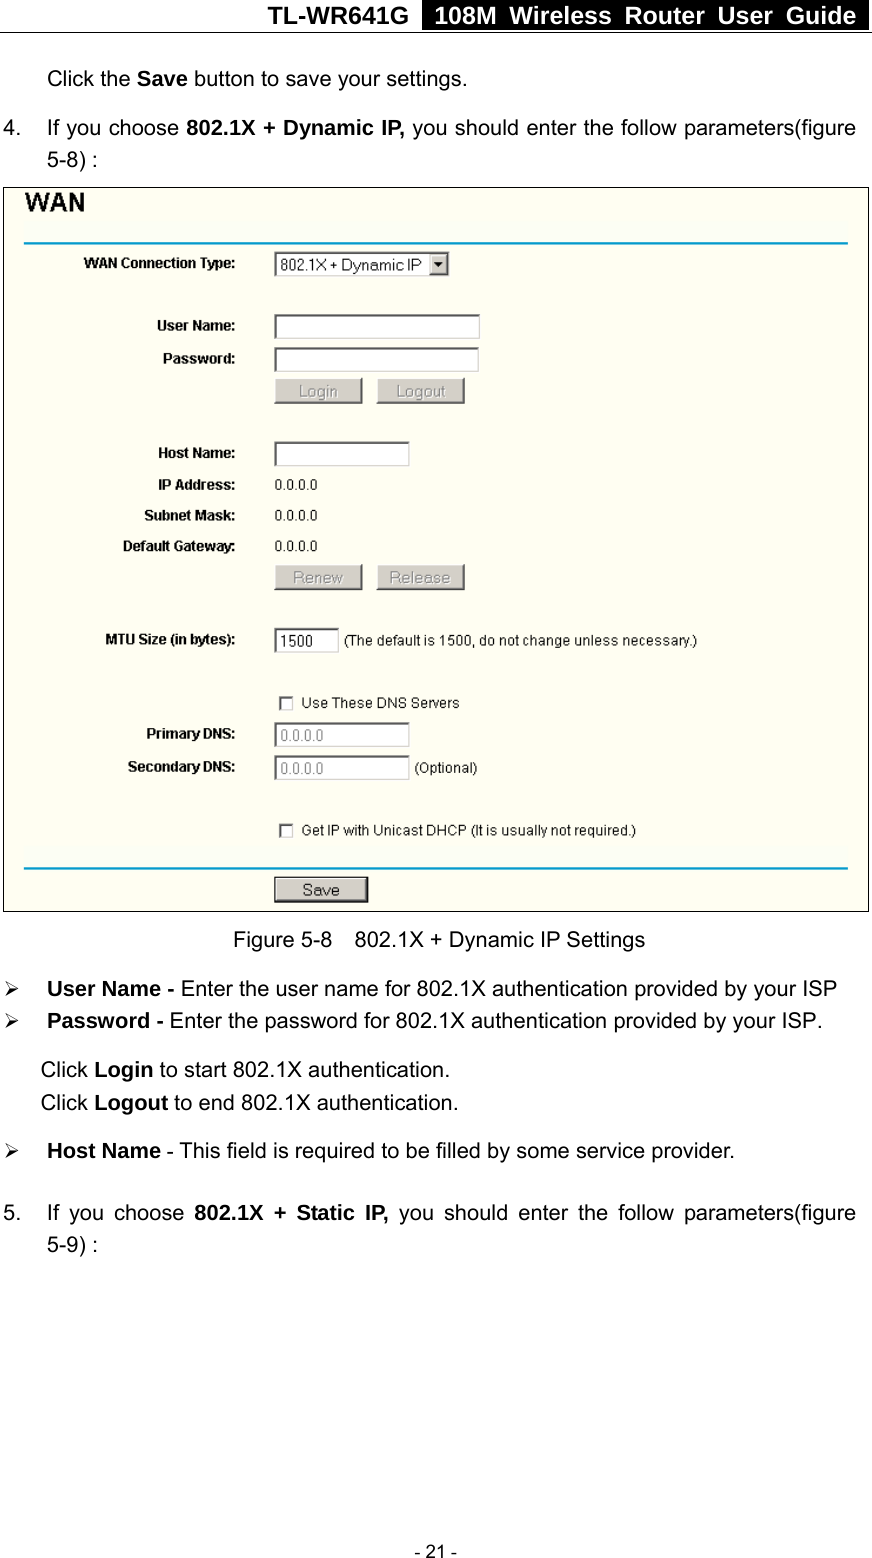 TL-WR641G   108M Wireless Router User Guide  Click the Save button to save your settings. 4.  If you choose 802.1X + Dynamic IP, you should enter the follow parameters(figure 5-8) :  Figure 5-8    802.1X + Dynamic IP Settings ¾ User Name - Enter the user name for 802.1X authentication provided by your ISP ¾ Password - Enter the password for 802.1X authentication provided by your ISP. Click Login to start 802.1X authentication. Click Logout to end 802.1X authentication. ¾ Host Name - This field is required to be filled by some service provider. 5.  If you choose 802.1X + Static IP, you should enter the follow parameters(figure 5-9) :  - 21 - 